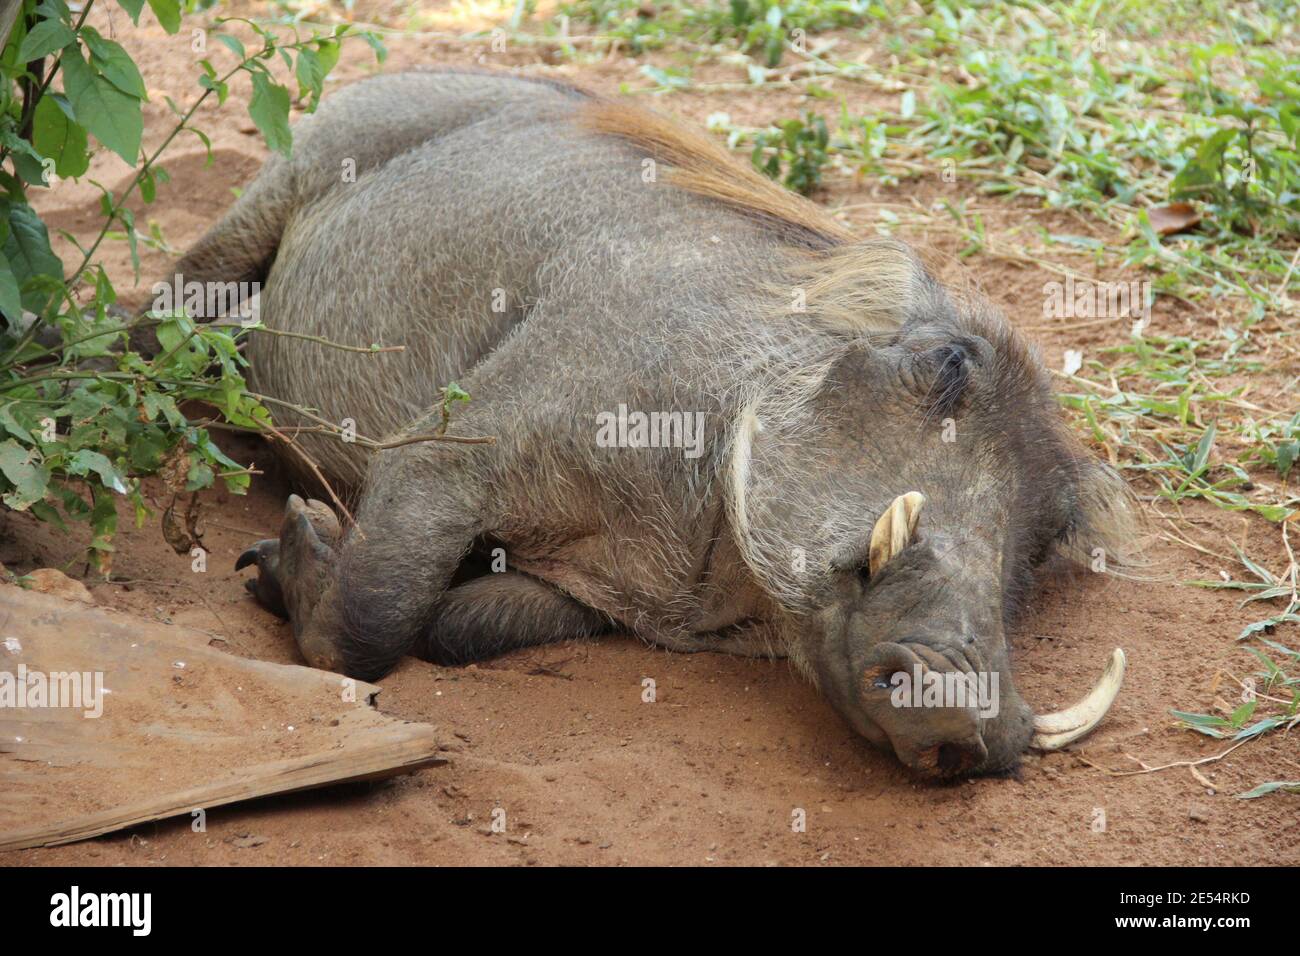 A warthog sleeps in the dirt in the Murchison Falls National Park in Uganda Stock Photo